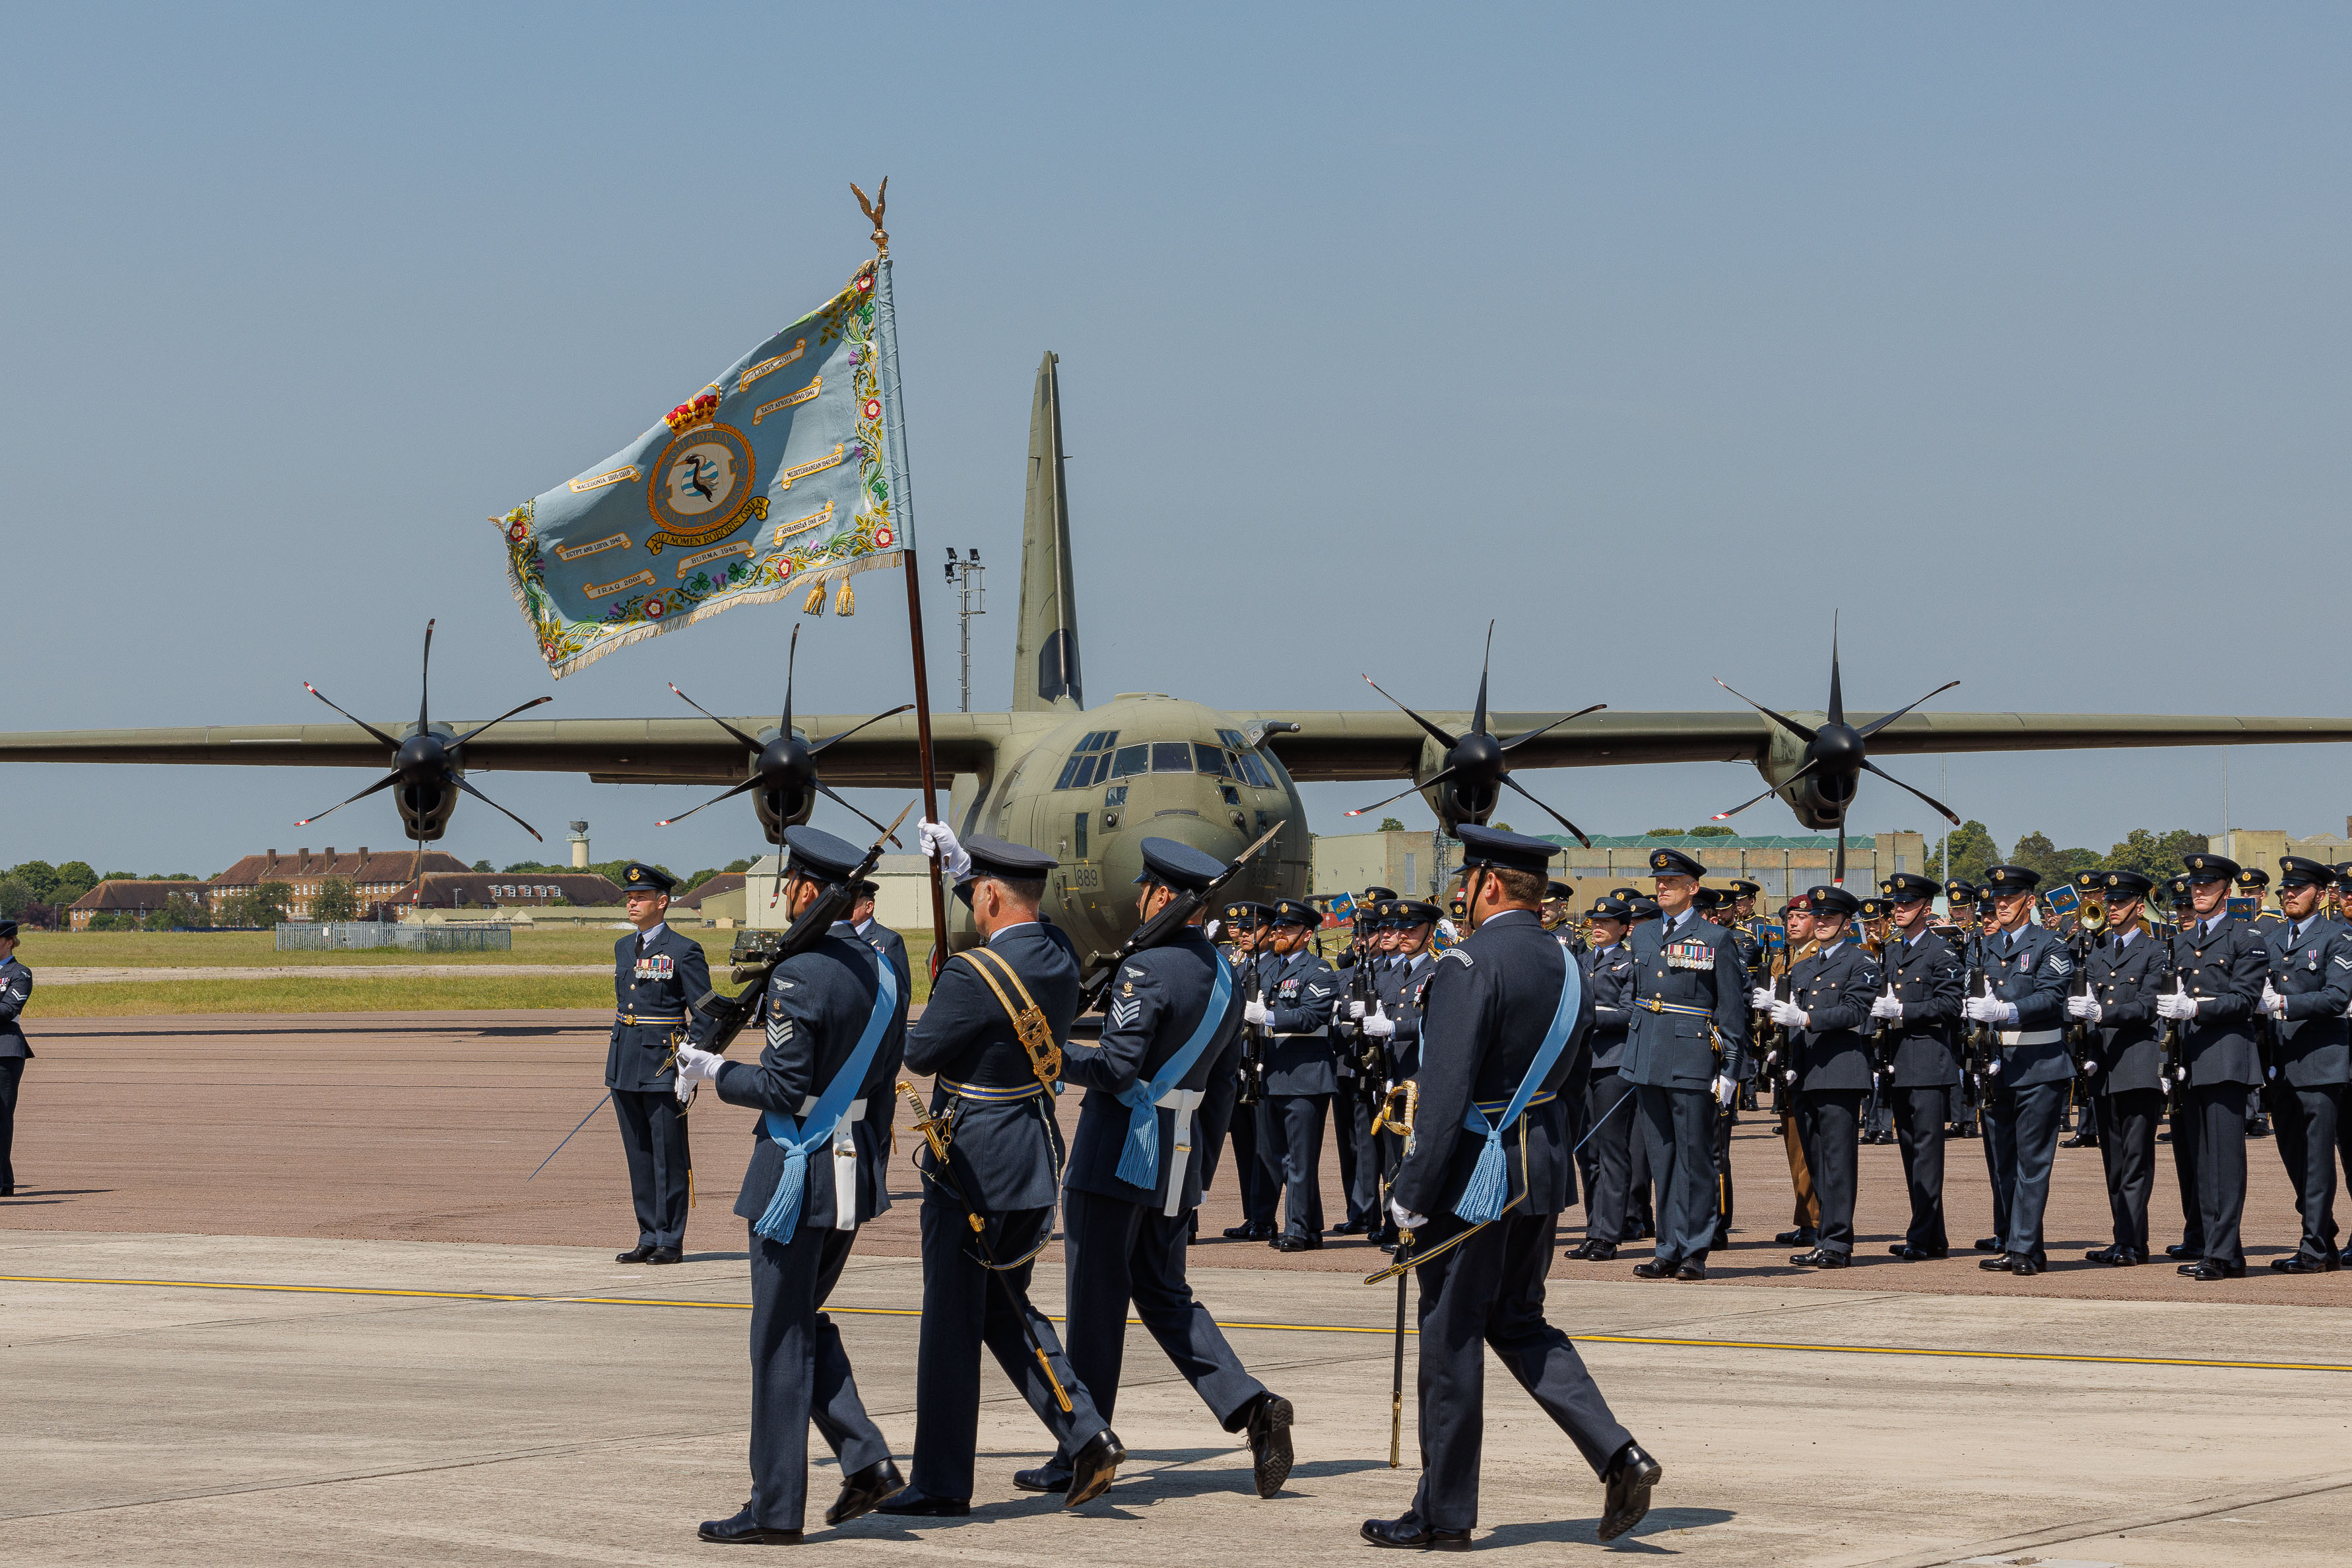 Today, Her Royal Highness, The Princess Royal, attended the stand down parade of Number 47 Squadron and the retirement of the C-130 Hercules.